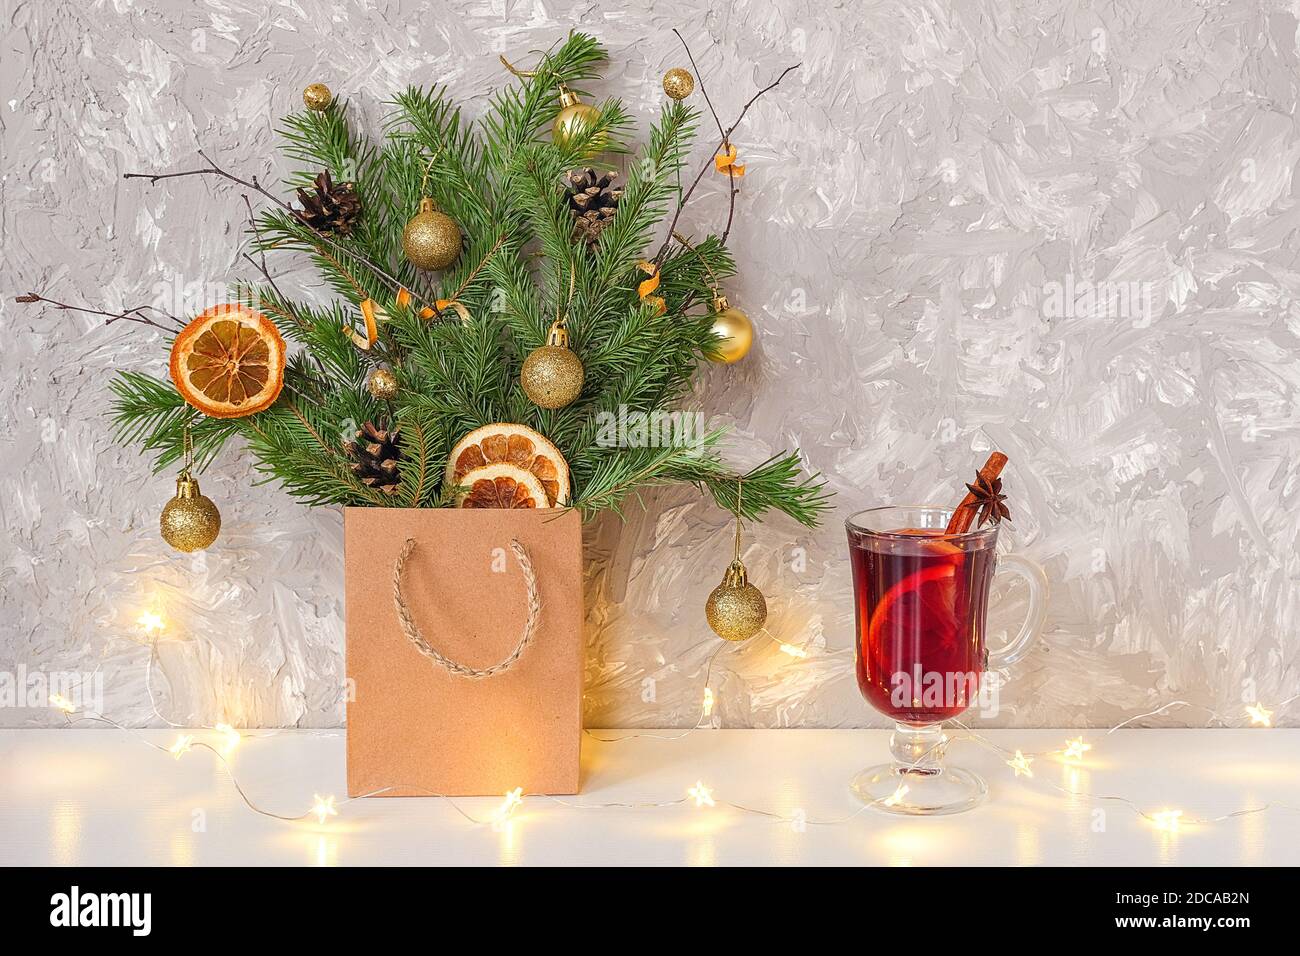 Christmas tree decorated golden balls, cones in craft package, lights garland and glass of hot mulled wine with spices on table. Xmas or New Year, win Stock Photo